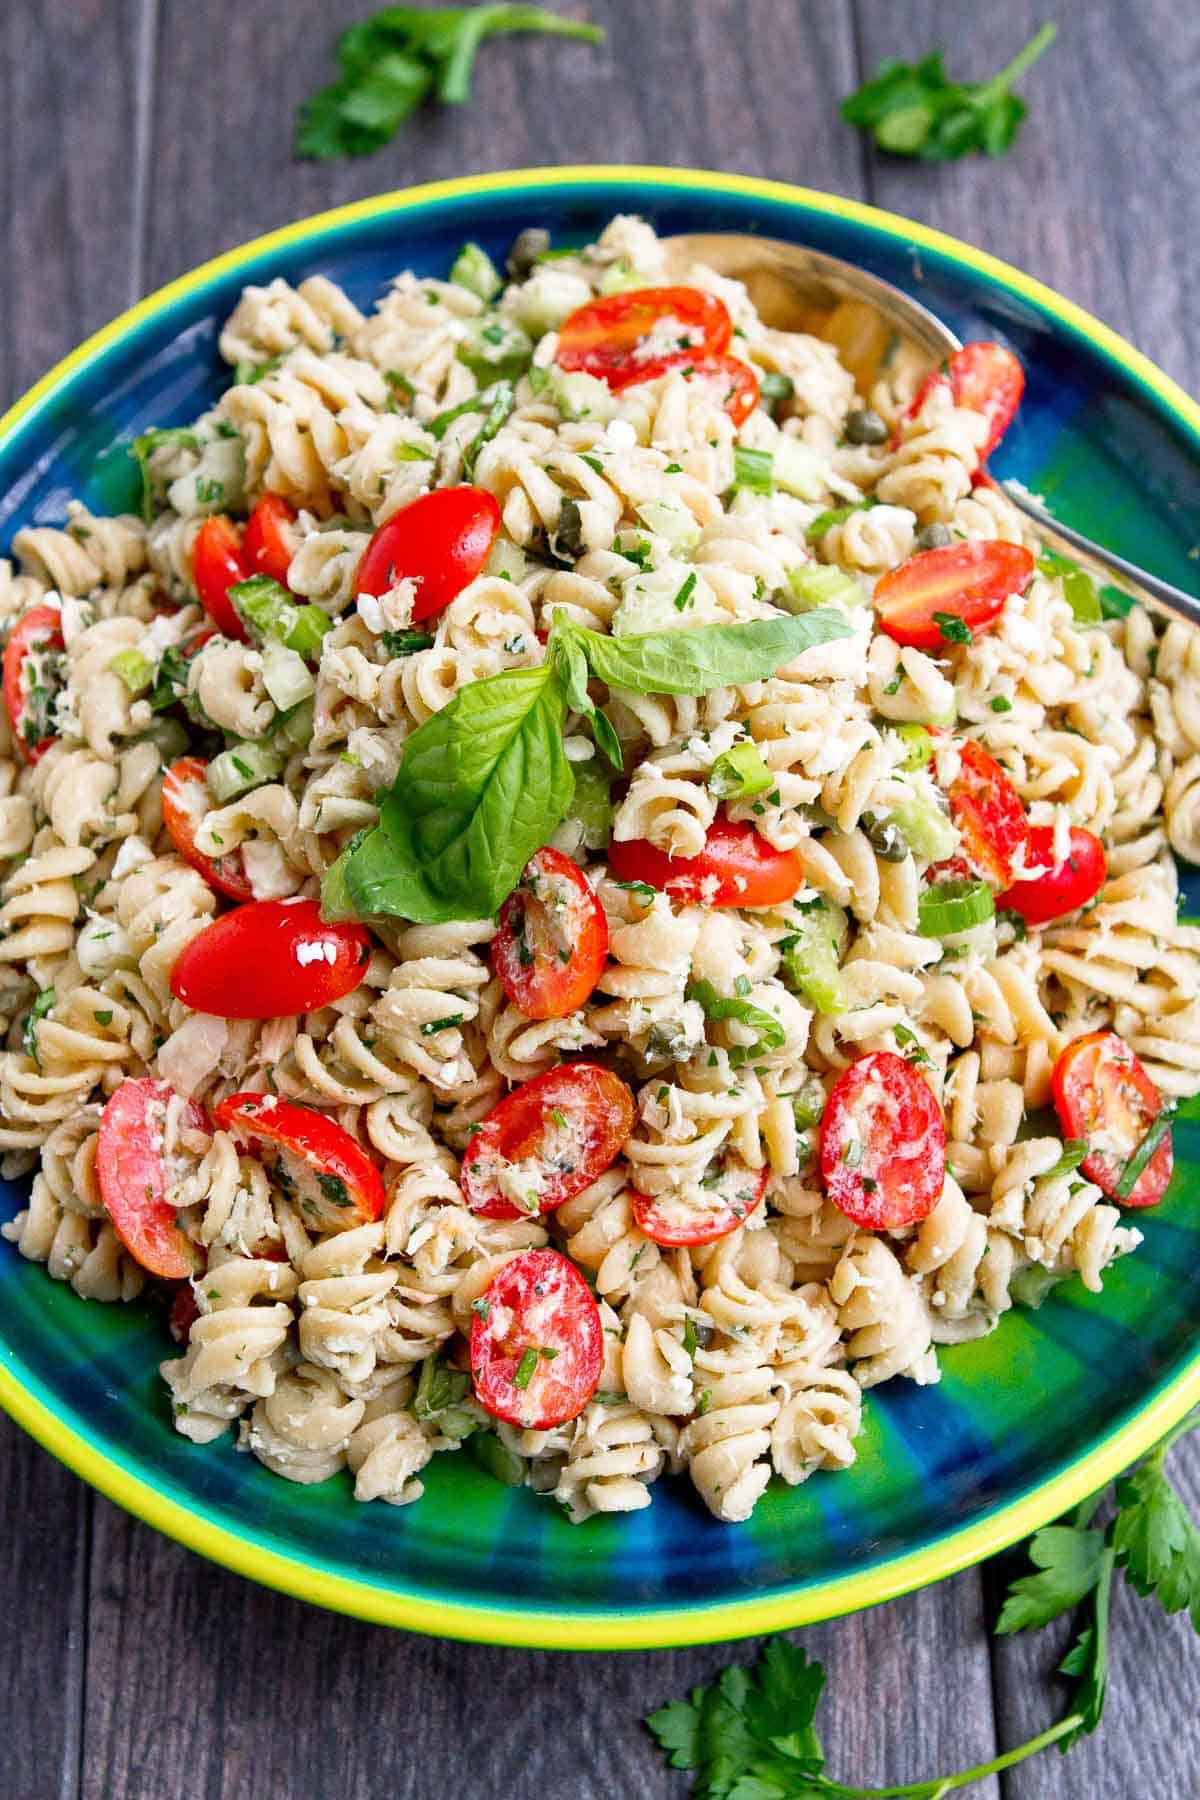 verhead photo of pasta salad with tuna and tomatoes, in a green and blue bowl.